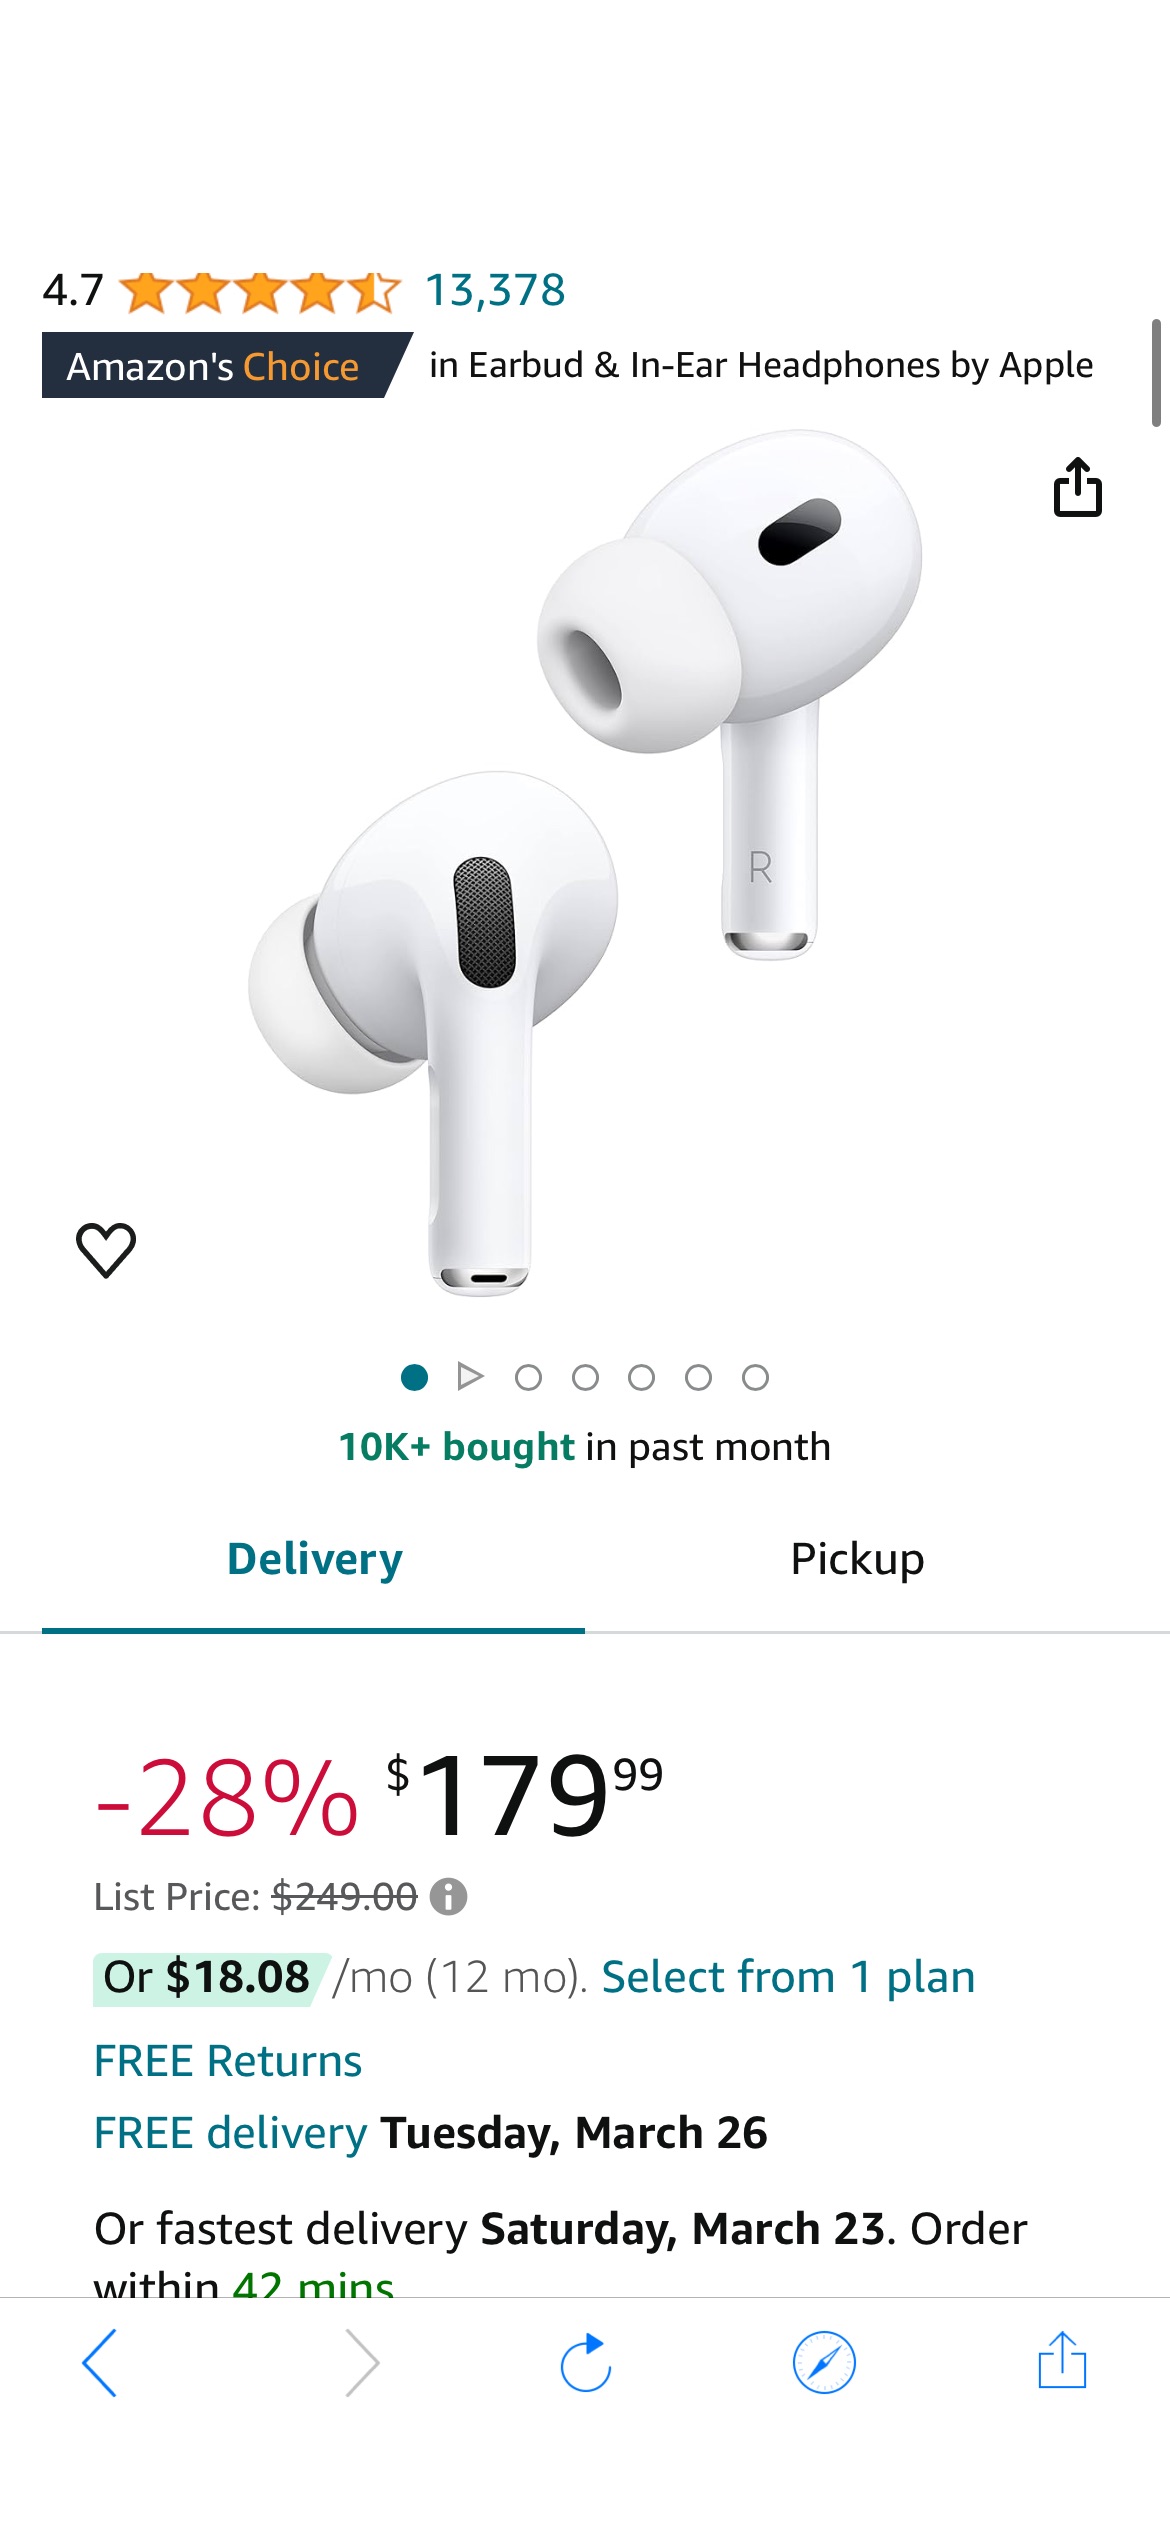 Amazon.com: Apple AirPods Pro (2nd Generation) Wireless Ear Buds with USB-C Charging, Up to 2X More Active Noise Cancelling Bluetooth Headphones, Transparency Mode, Adaptive Audio, Personalized Spatia